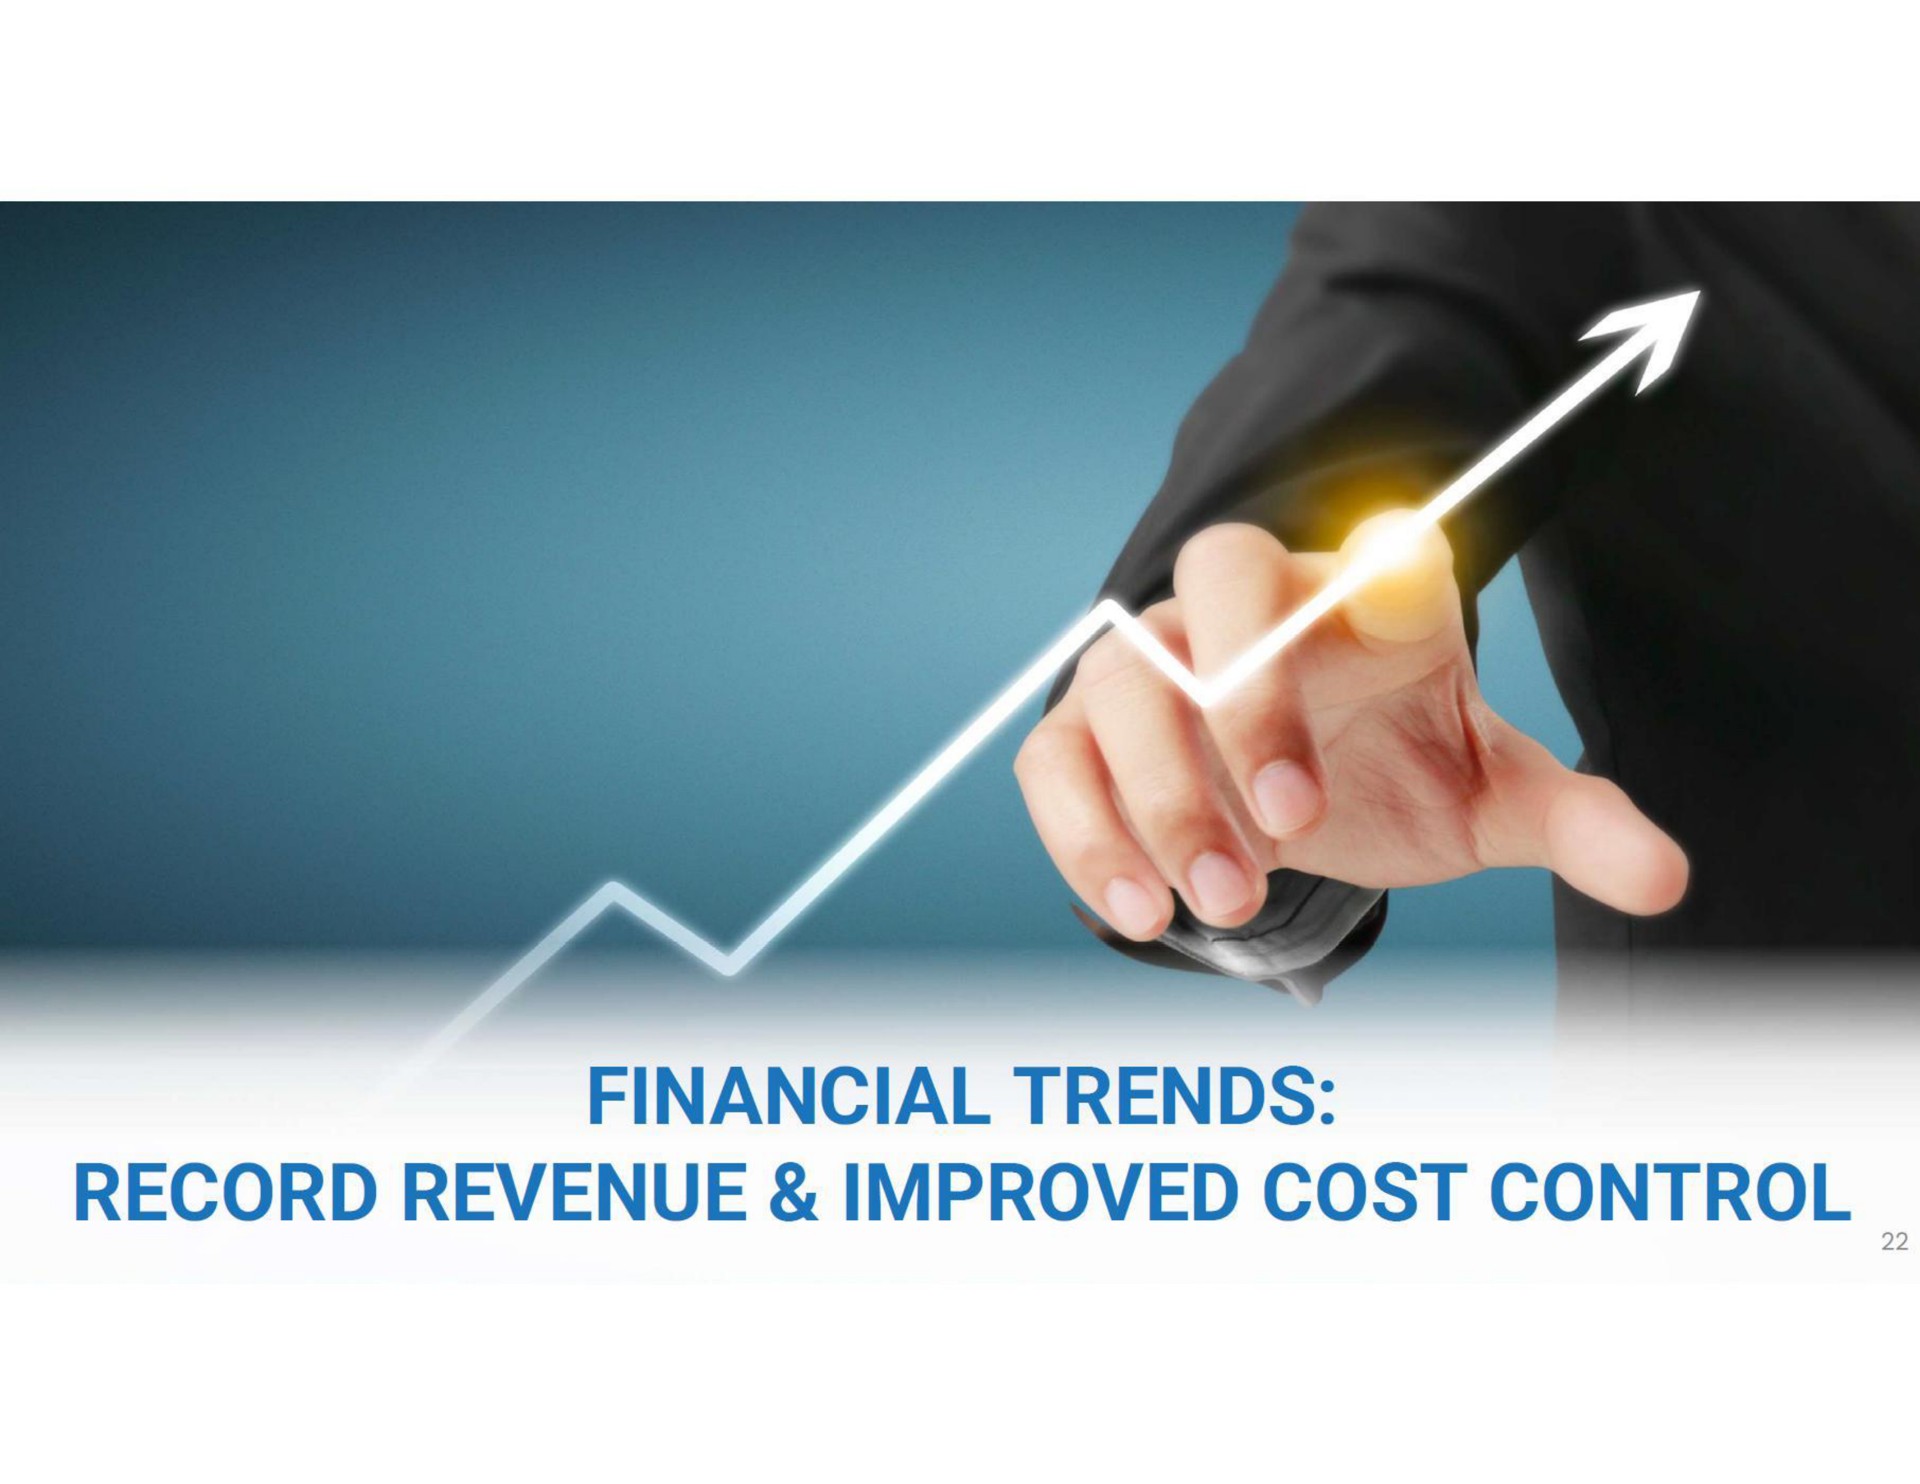 record revenue improved cost control financial trends | AYRO